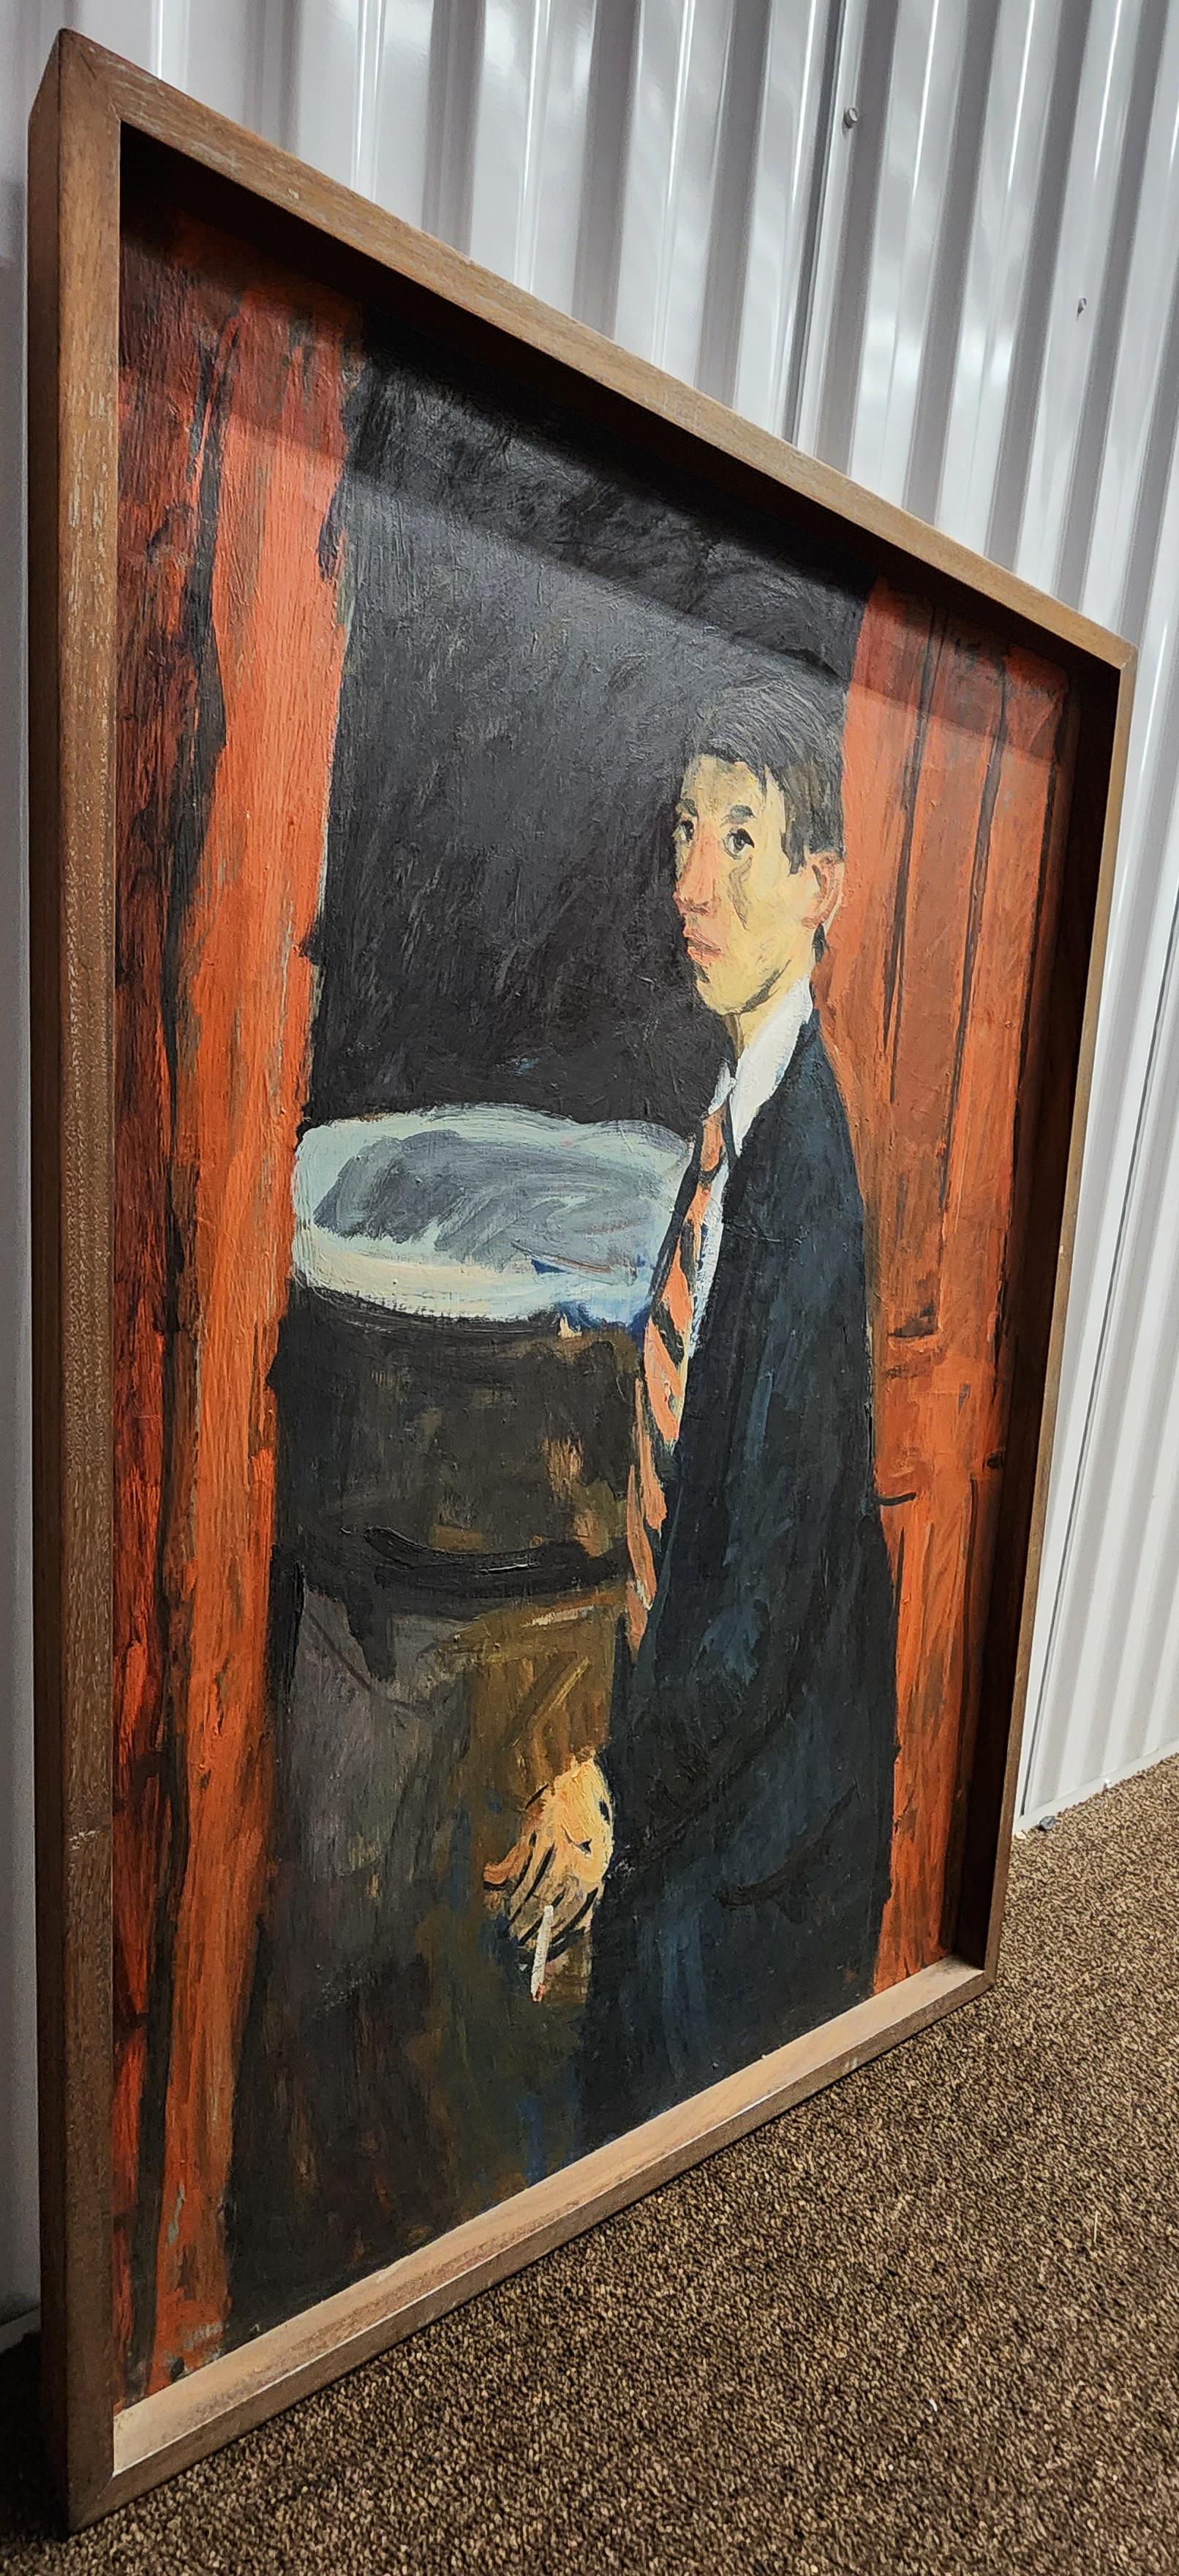 Alex Tschernjawski
Self Portrait
Oil on Canvas
1960s
Size: 37.5x25.5in
Framed: 39x27xin
Signed by hand
COA provided
Ref.: 924802-1826

*Condition: Good vintage condition. Craquelure. Vibrant colors.
**Framed in a brown, wooden frame. Ready to